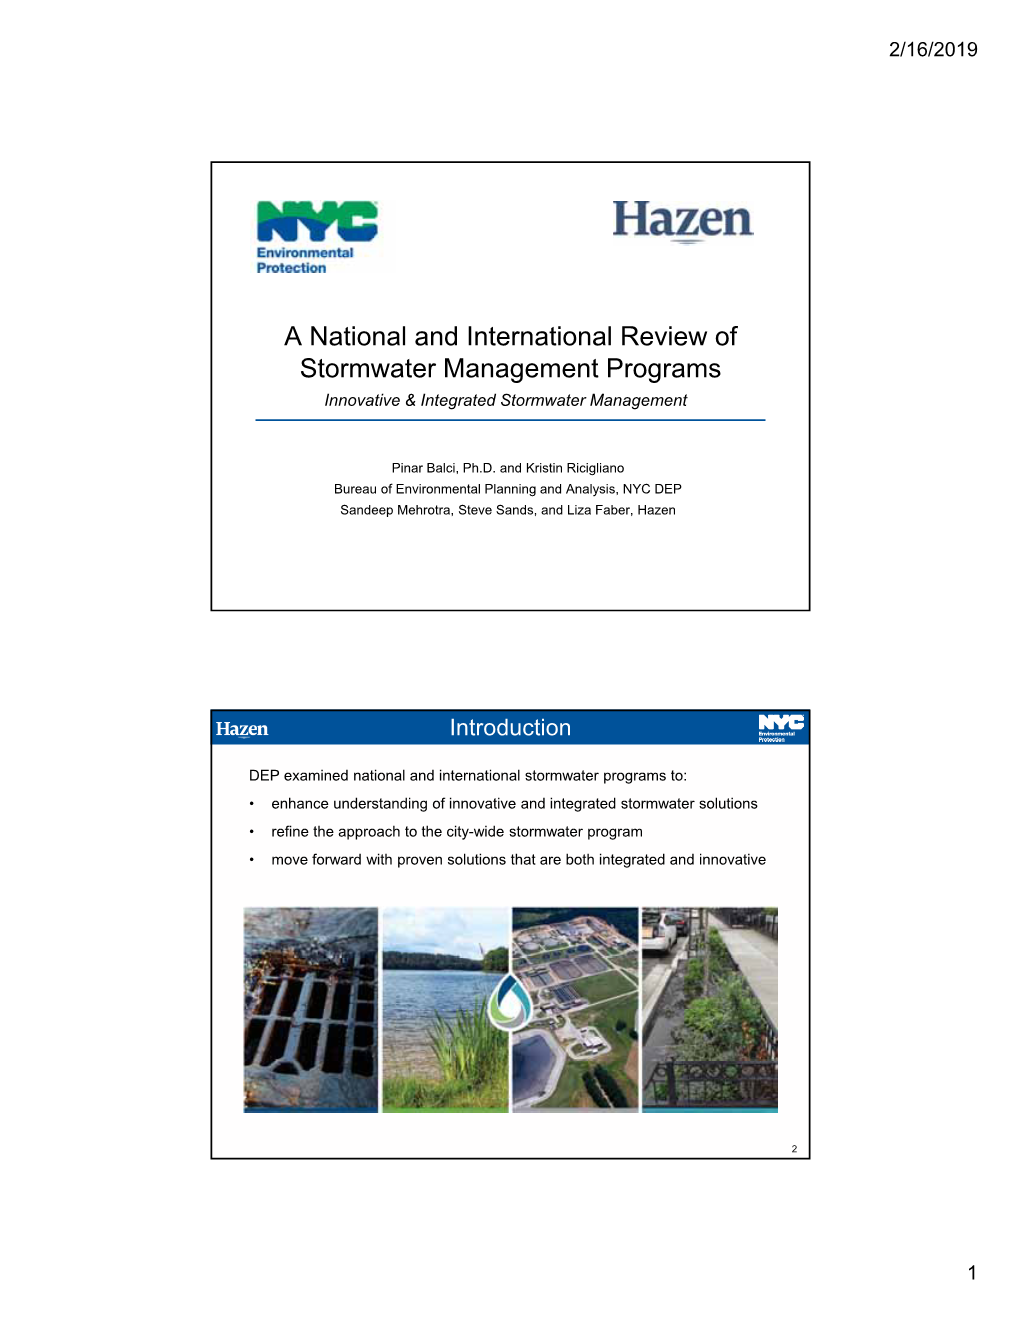 A National and International Review of Stormwater Management Programs Innovative & Integrated Stormwater Management